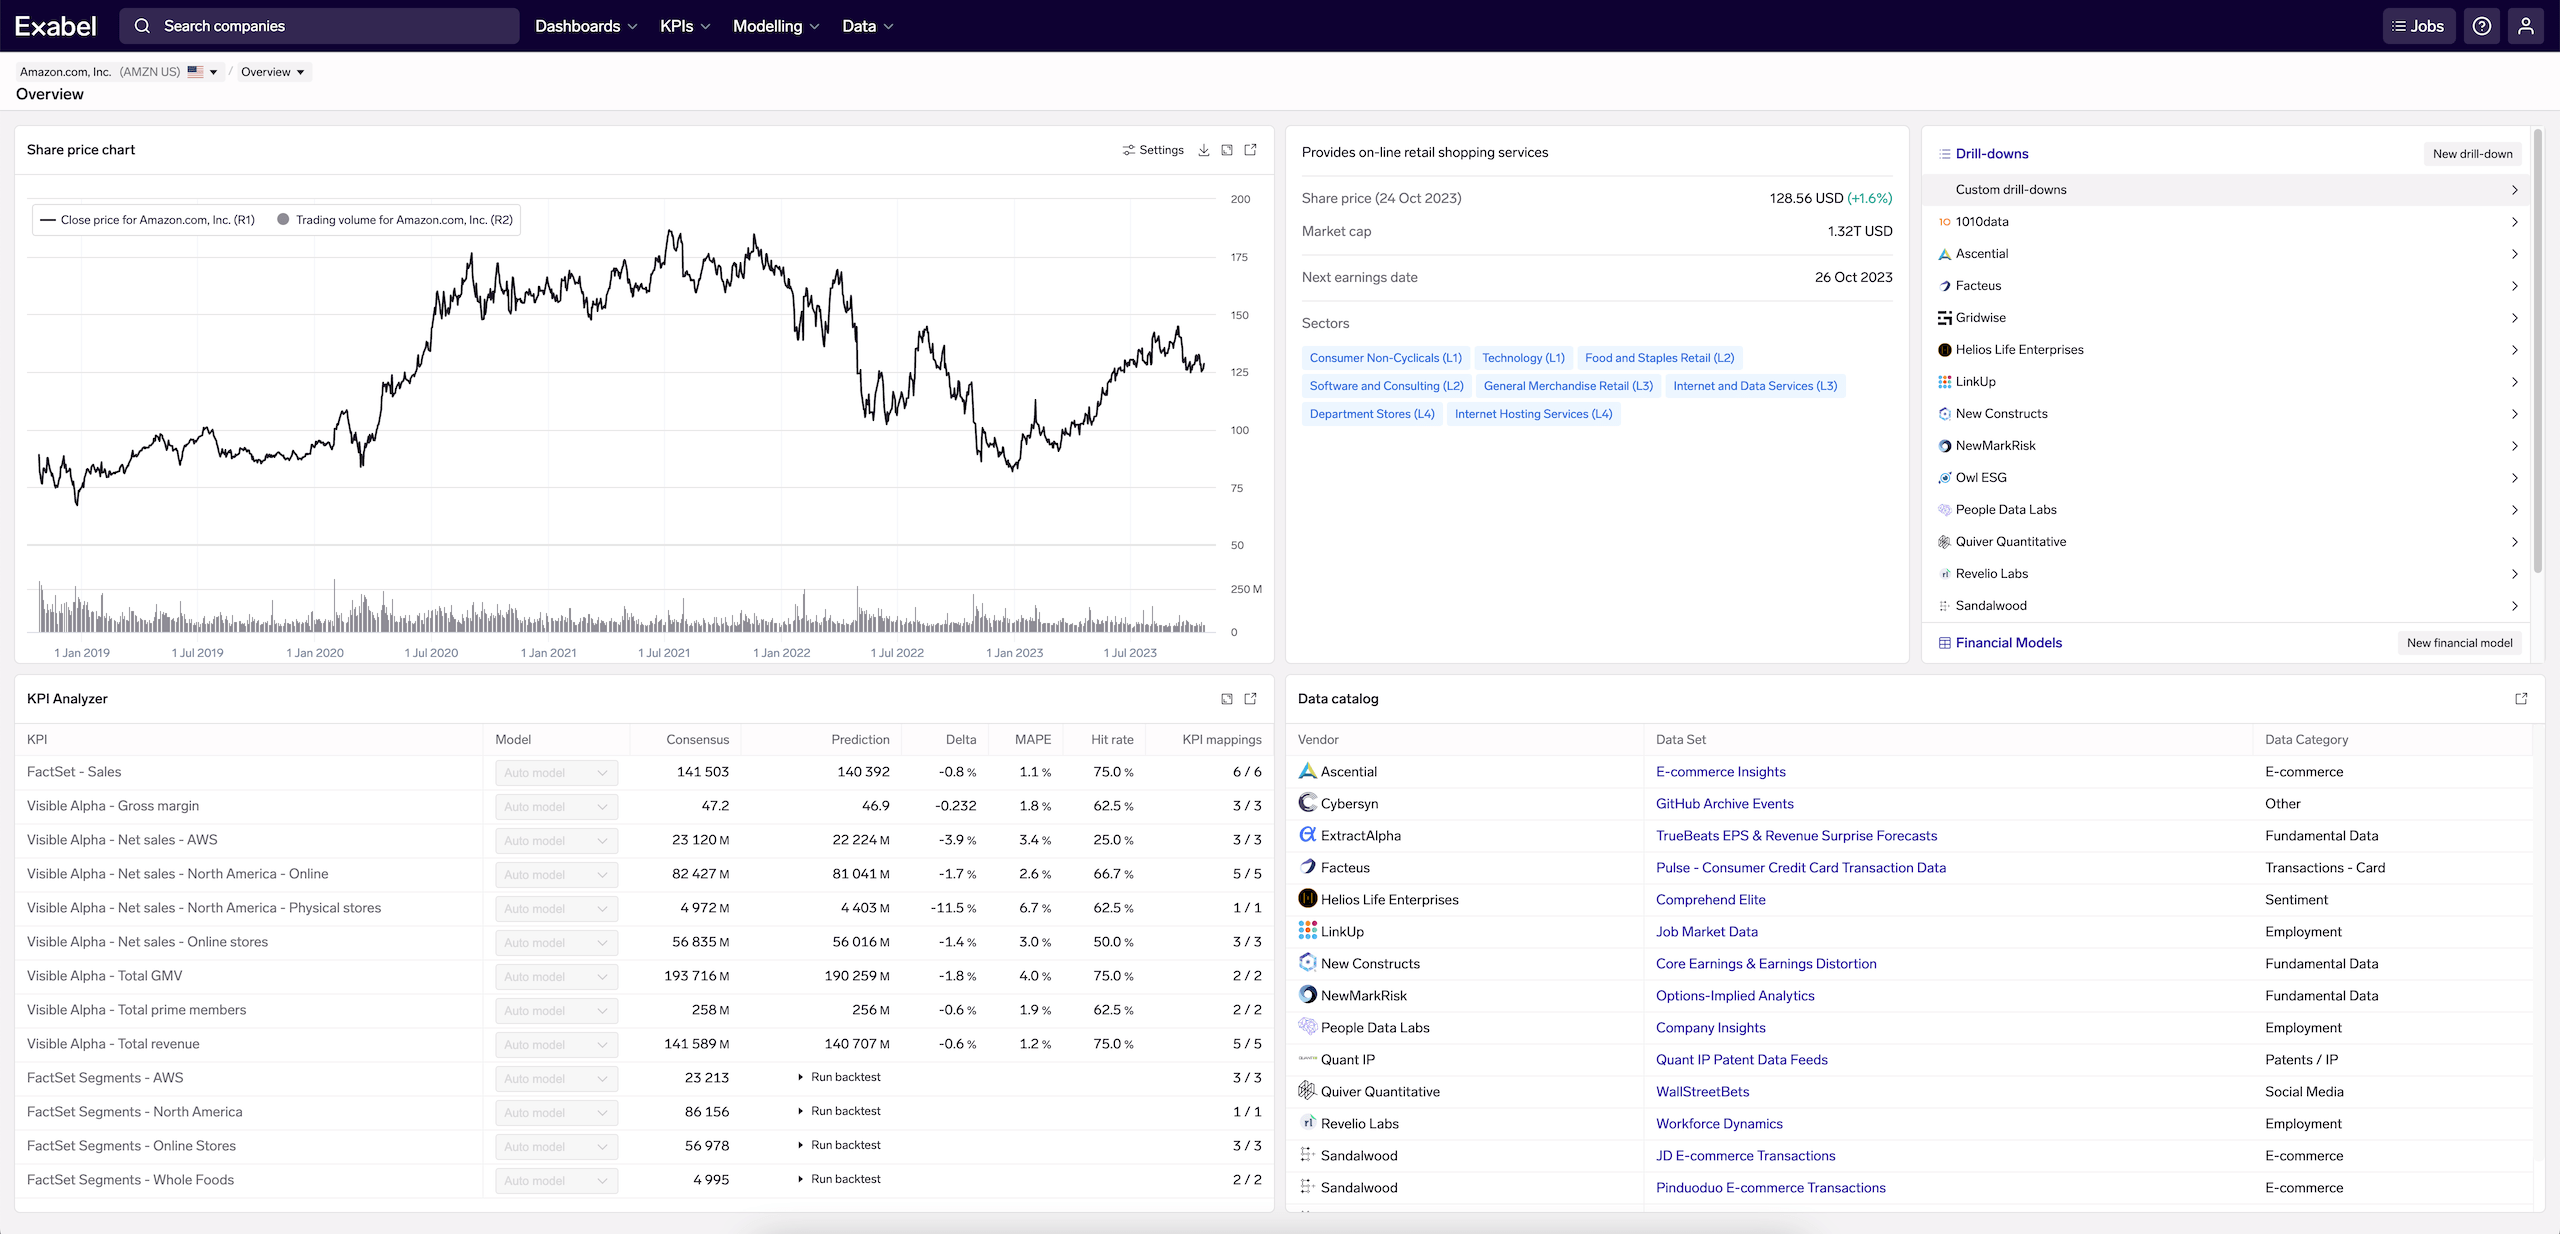 Amazon, Inc. company page, showing KPI analysis, vendor coverage & drill-down/financial model views, and general market data